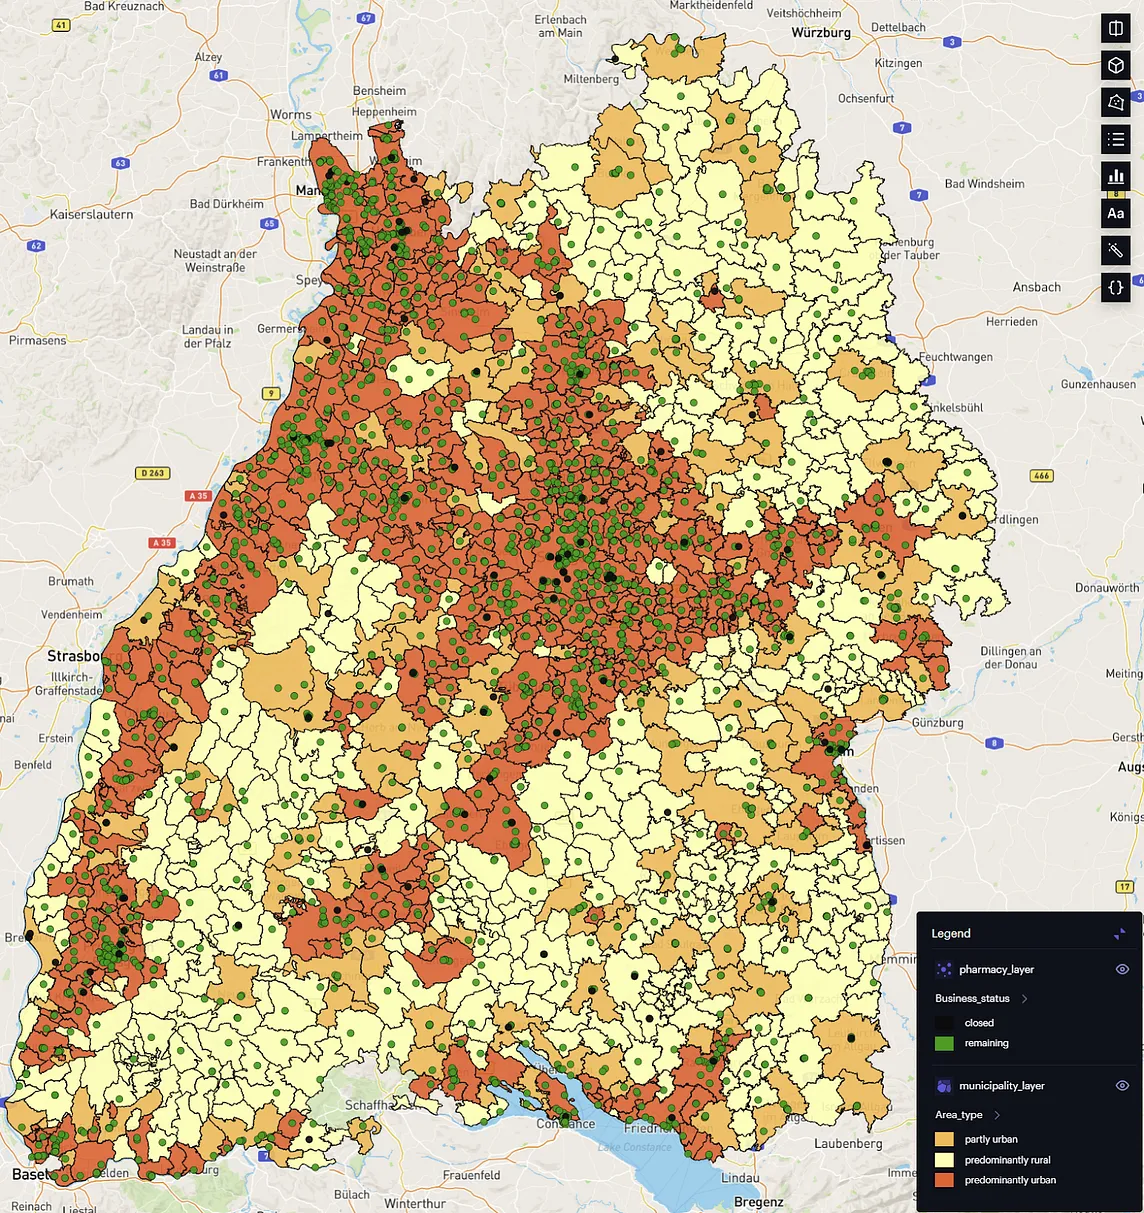 Who closed up shop? A geospatial analysis of pharmacy decline in Baden-Württemberg with KNIME